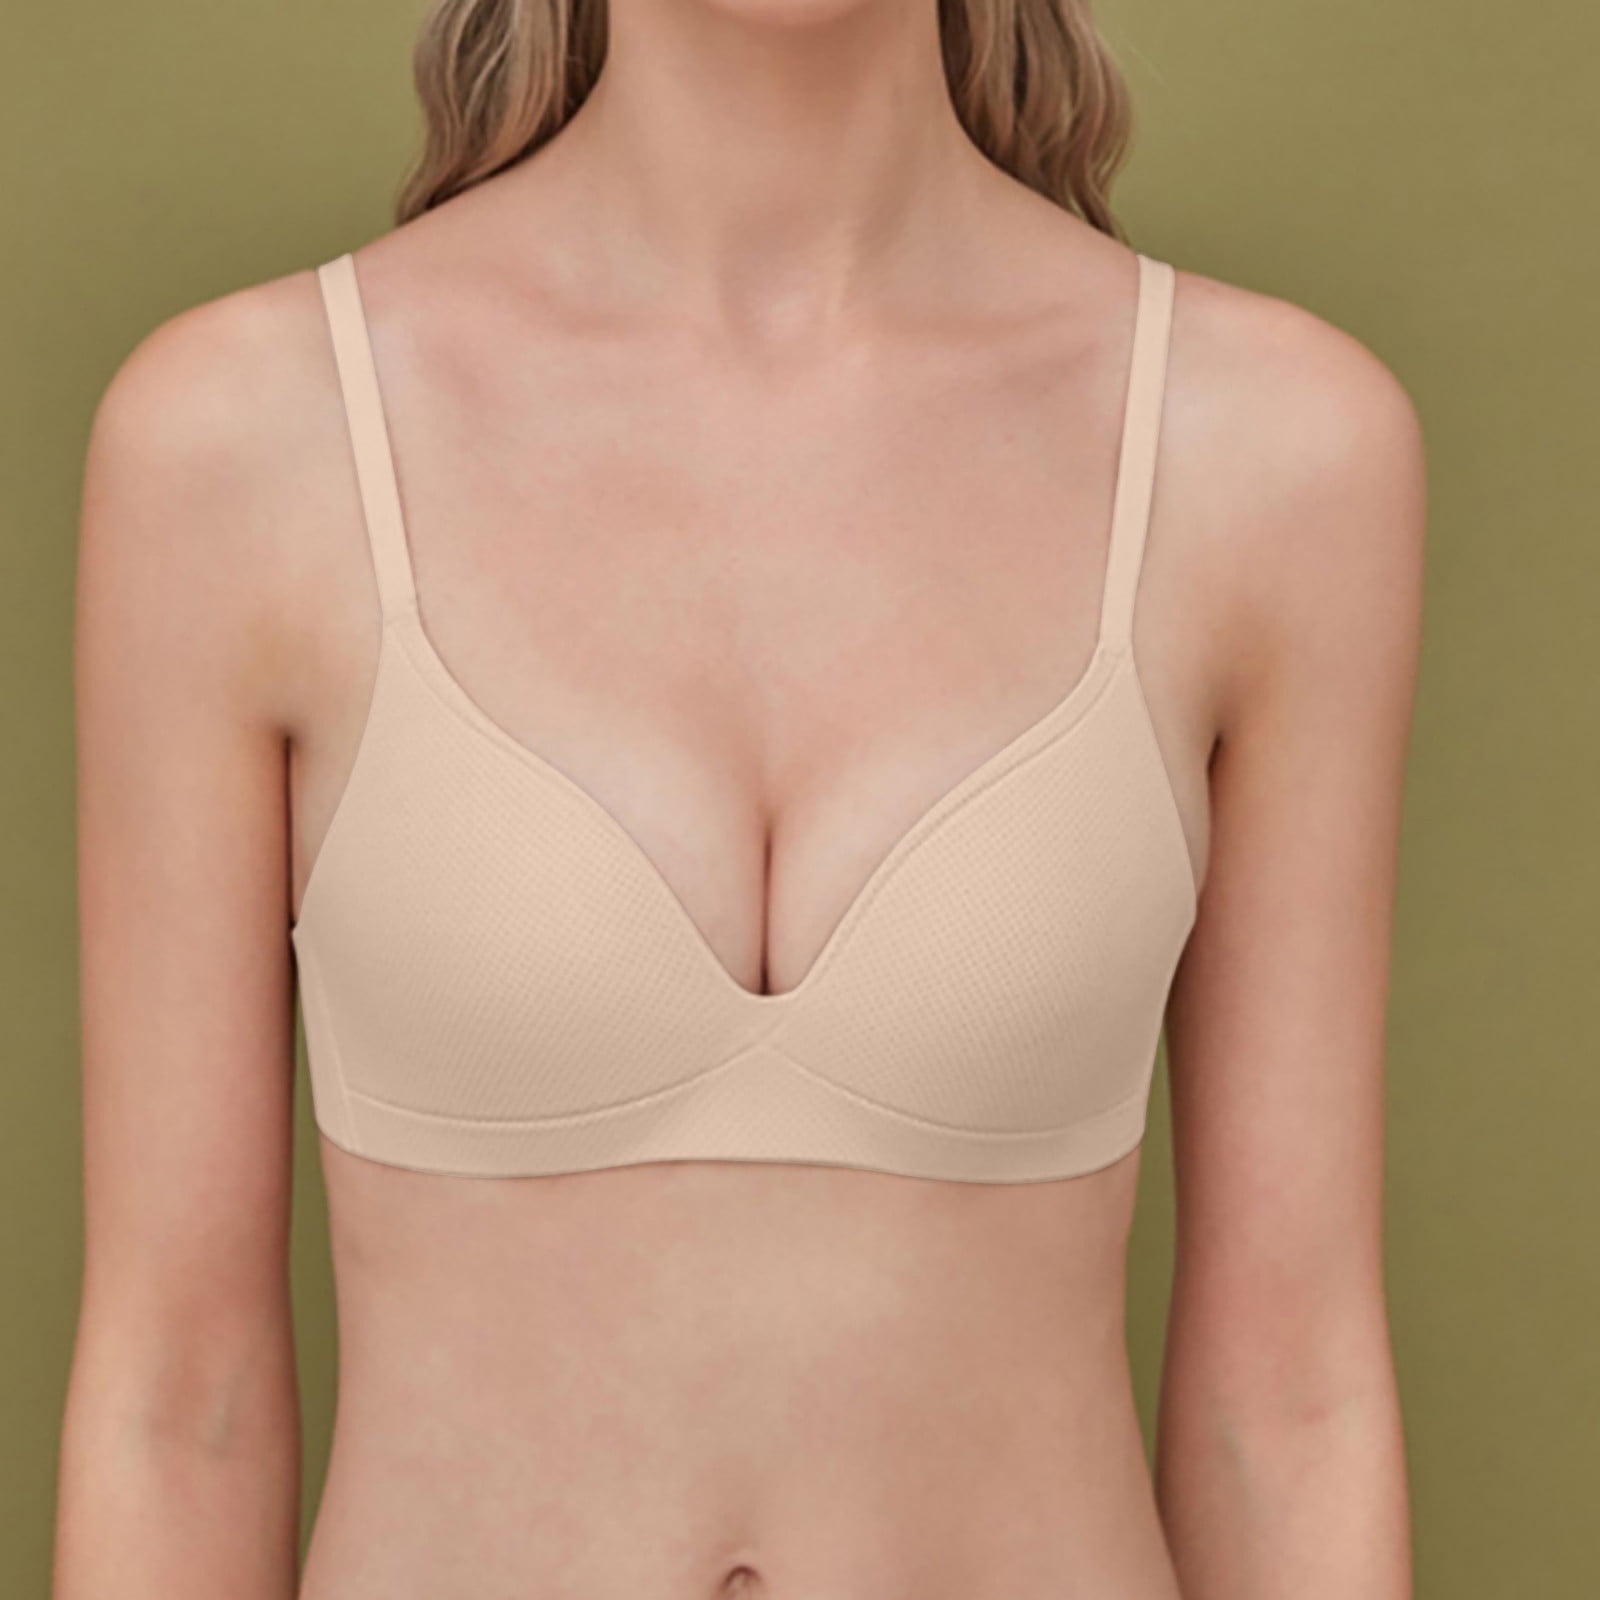 Meichang Strapless Bras for Women Wirefree Support T-shirt Bras